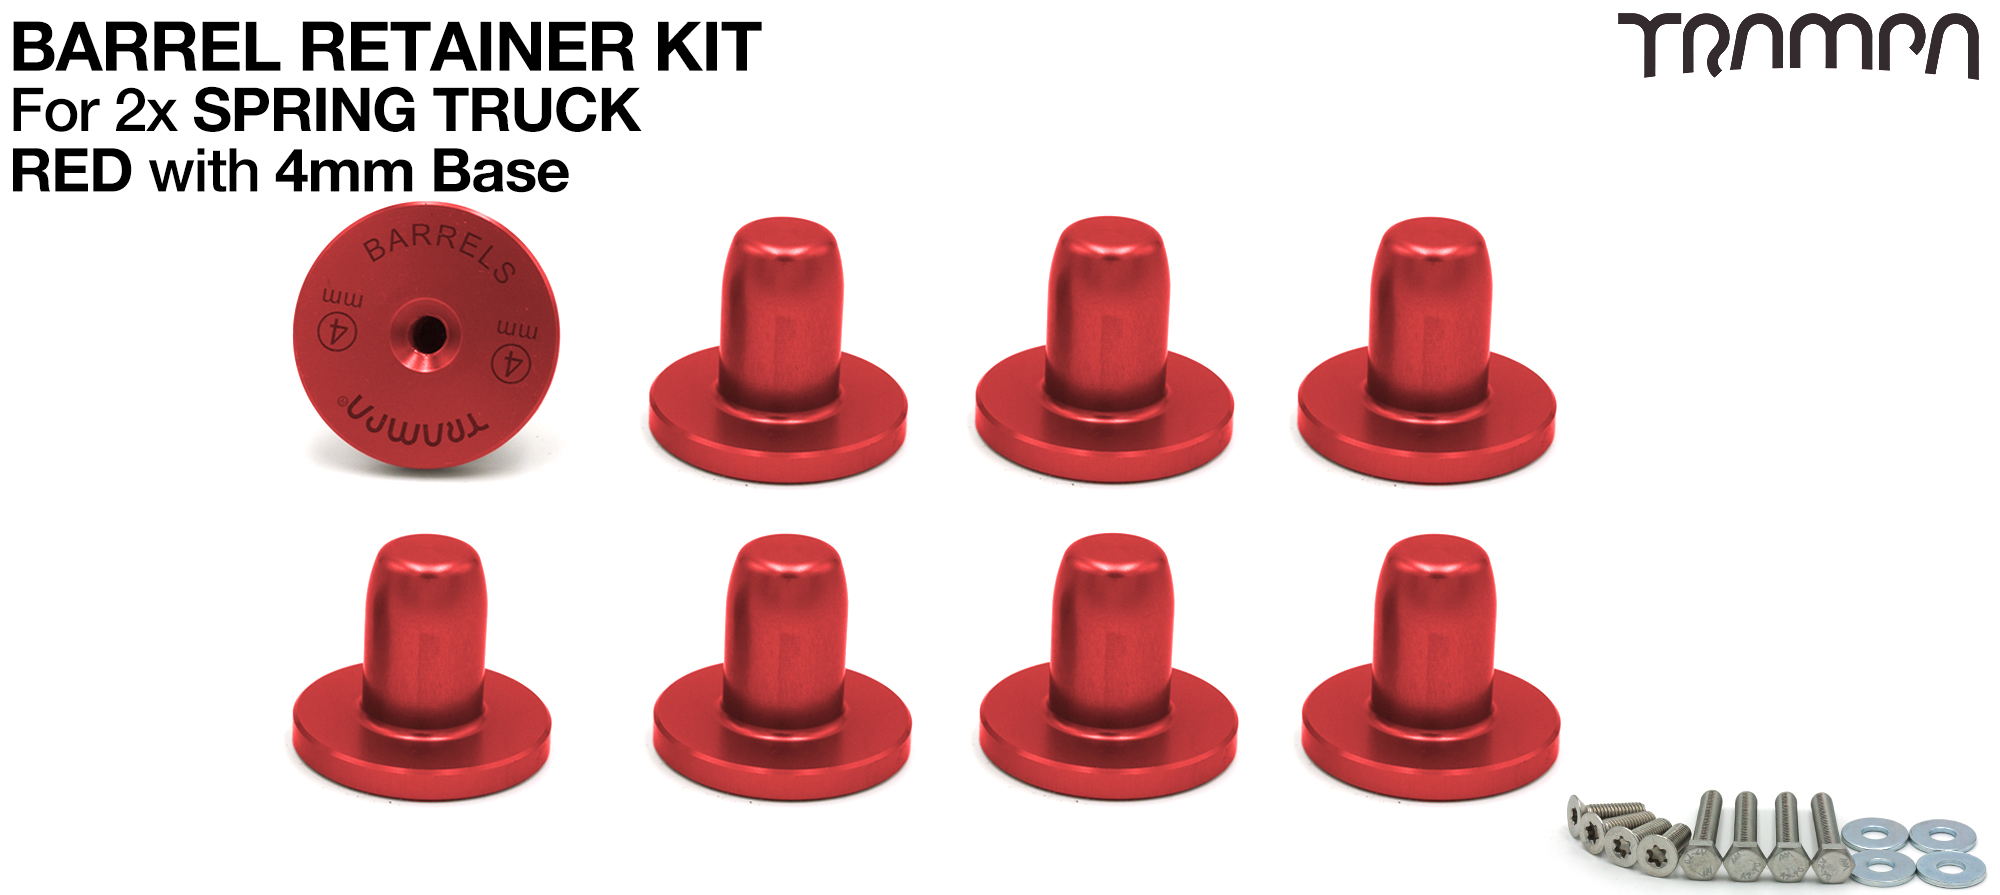 RED Barrel Retainers x8 with 4mm Base